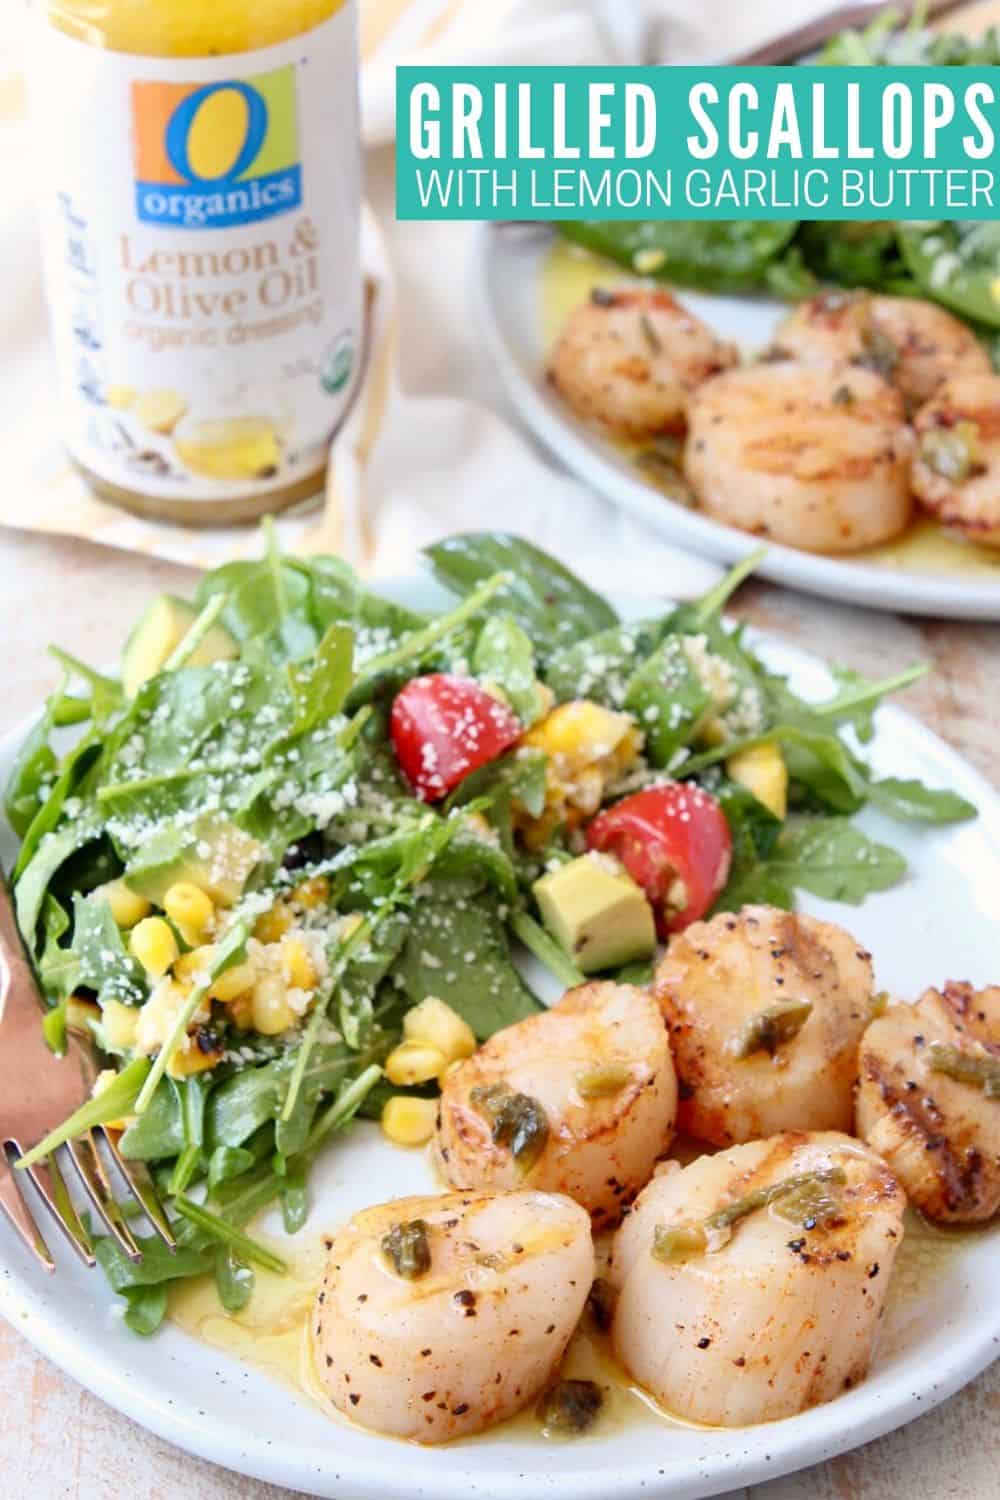 Perfect Grilled Scallops with Lemon Garlic Butter - WhitneyBond.com